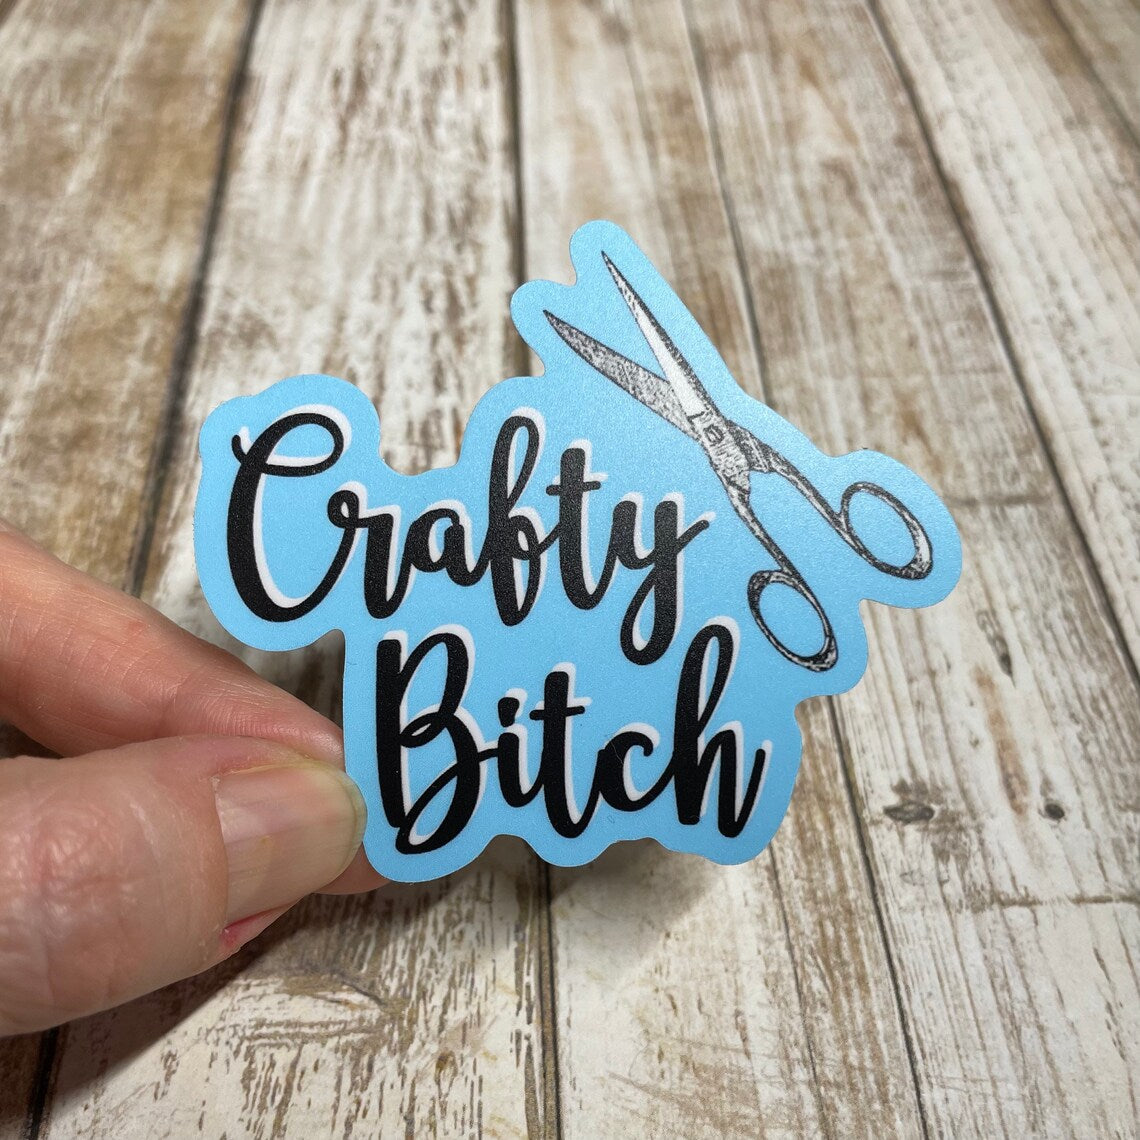 A photo of a blue cute sticker. It says 'Crafty Bitch' on it and there's a pair of scissors on the sticker.